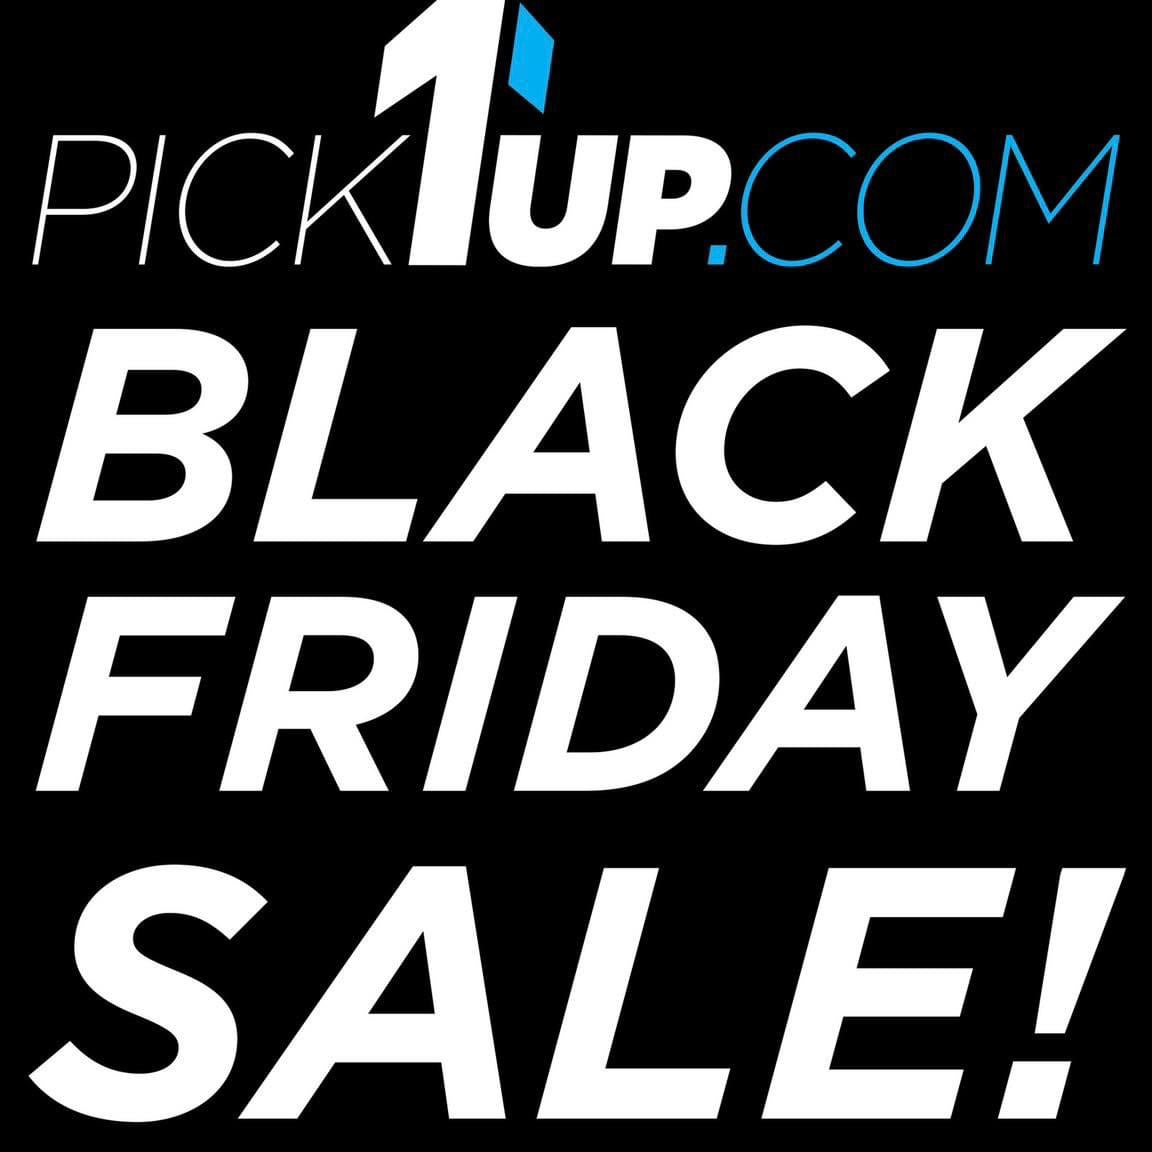 Check out this years Black Friday - Cyber Monday sale deals